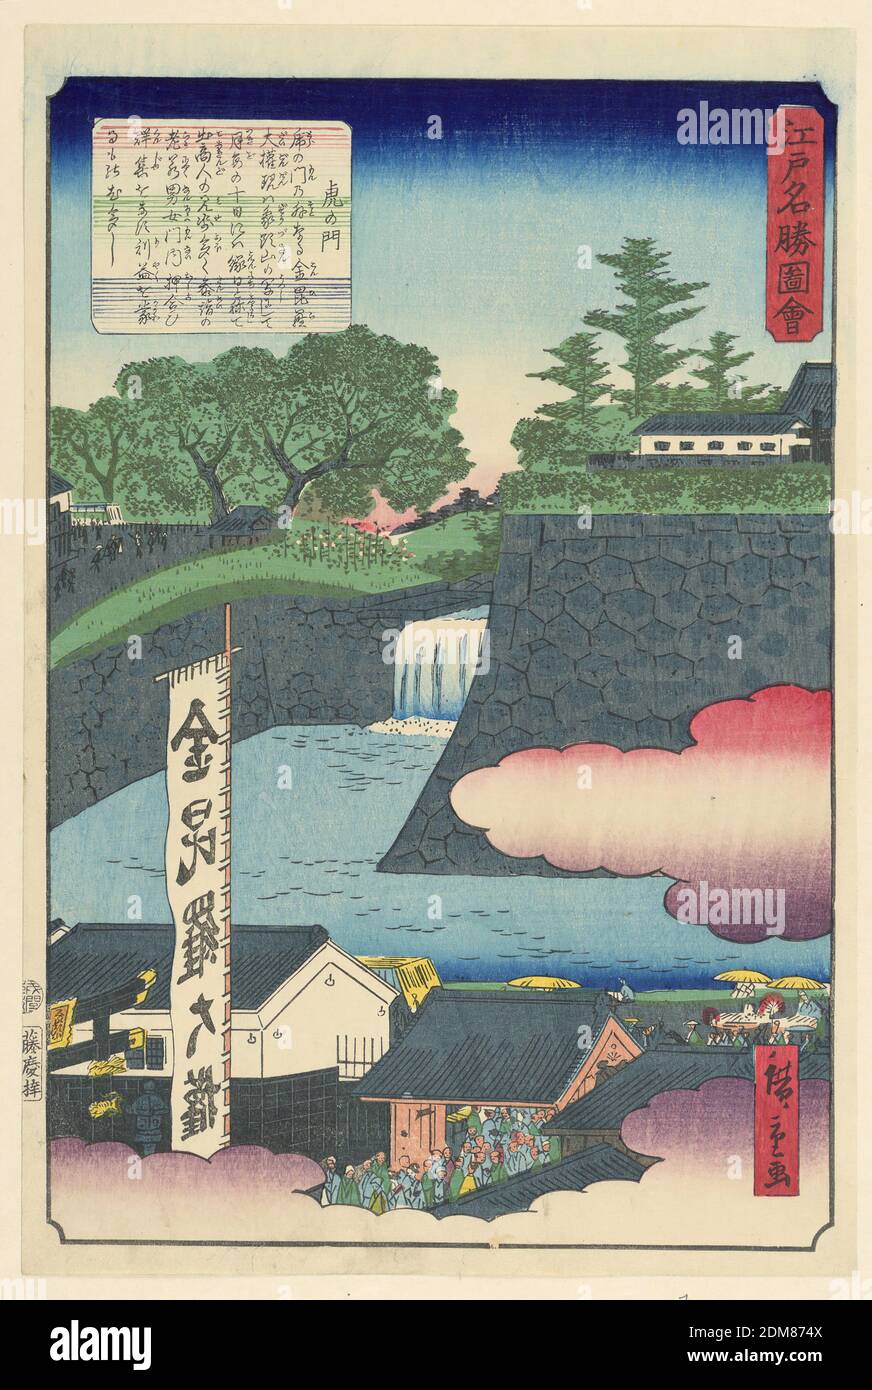 Castle Moat, Ando Hiroshige, Japanese, 1797–1858, Woodblock print in colored ink on paper, This unordinary print comprises of the rock wall and moat around a castle. The lower half of the print shows a bustling crowd of people heading toward the gateway of a Shinto shrine. Notice the matching sunset pink and ombre effect of the clouds in the front – Hiroshige’s impeccable attention to detail comes through in this interesting scene., Japan, 1797-1858, landscapes, Print Stock Photo